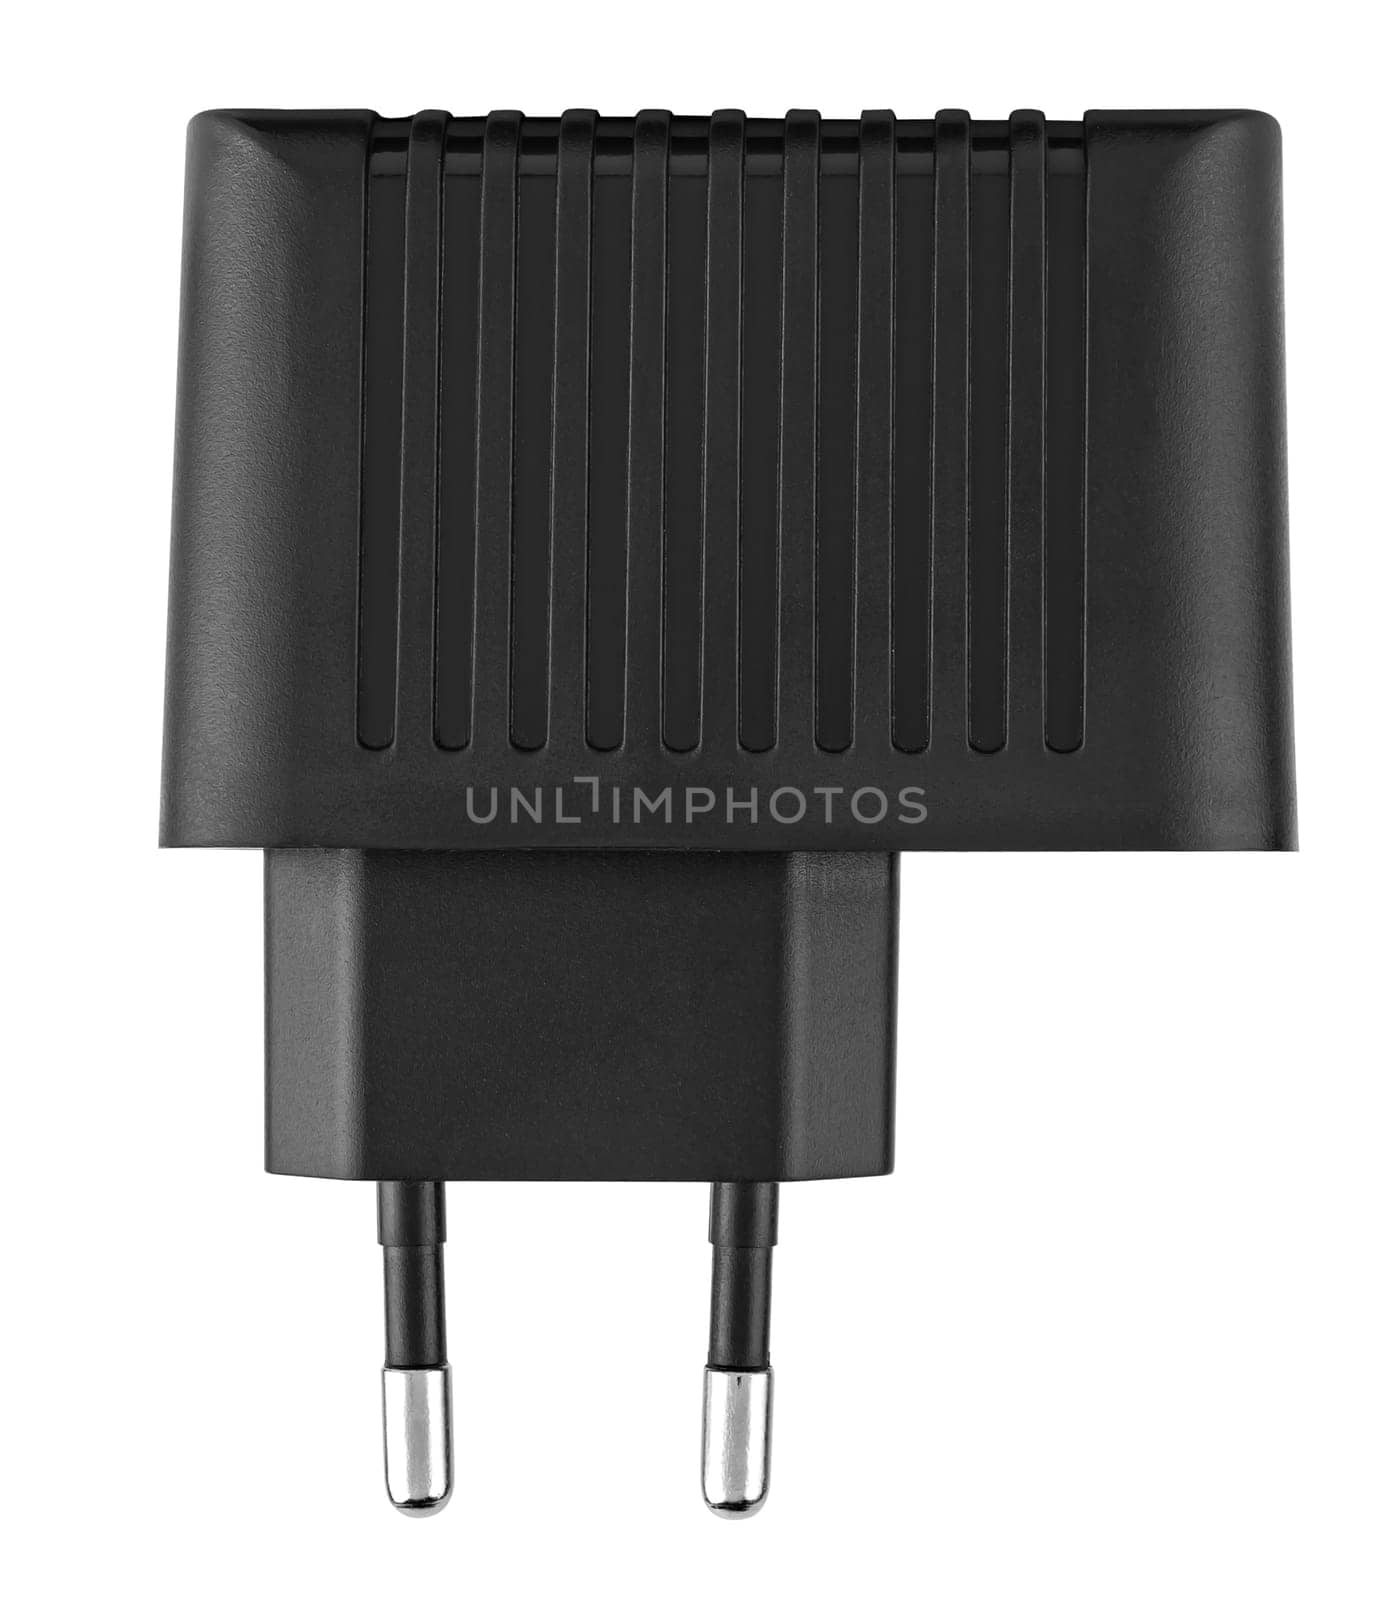 Power adapter, insulated white background